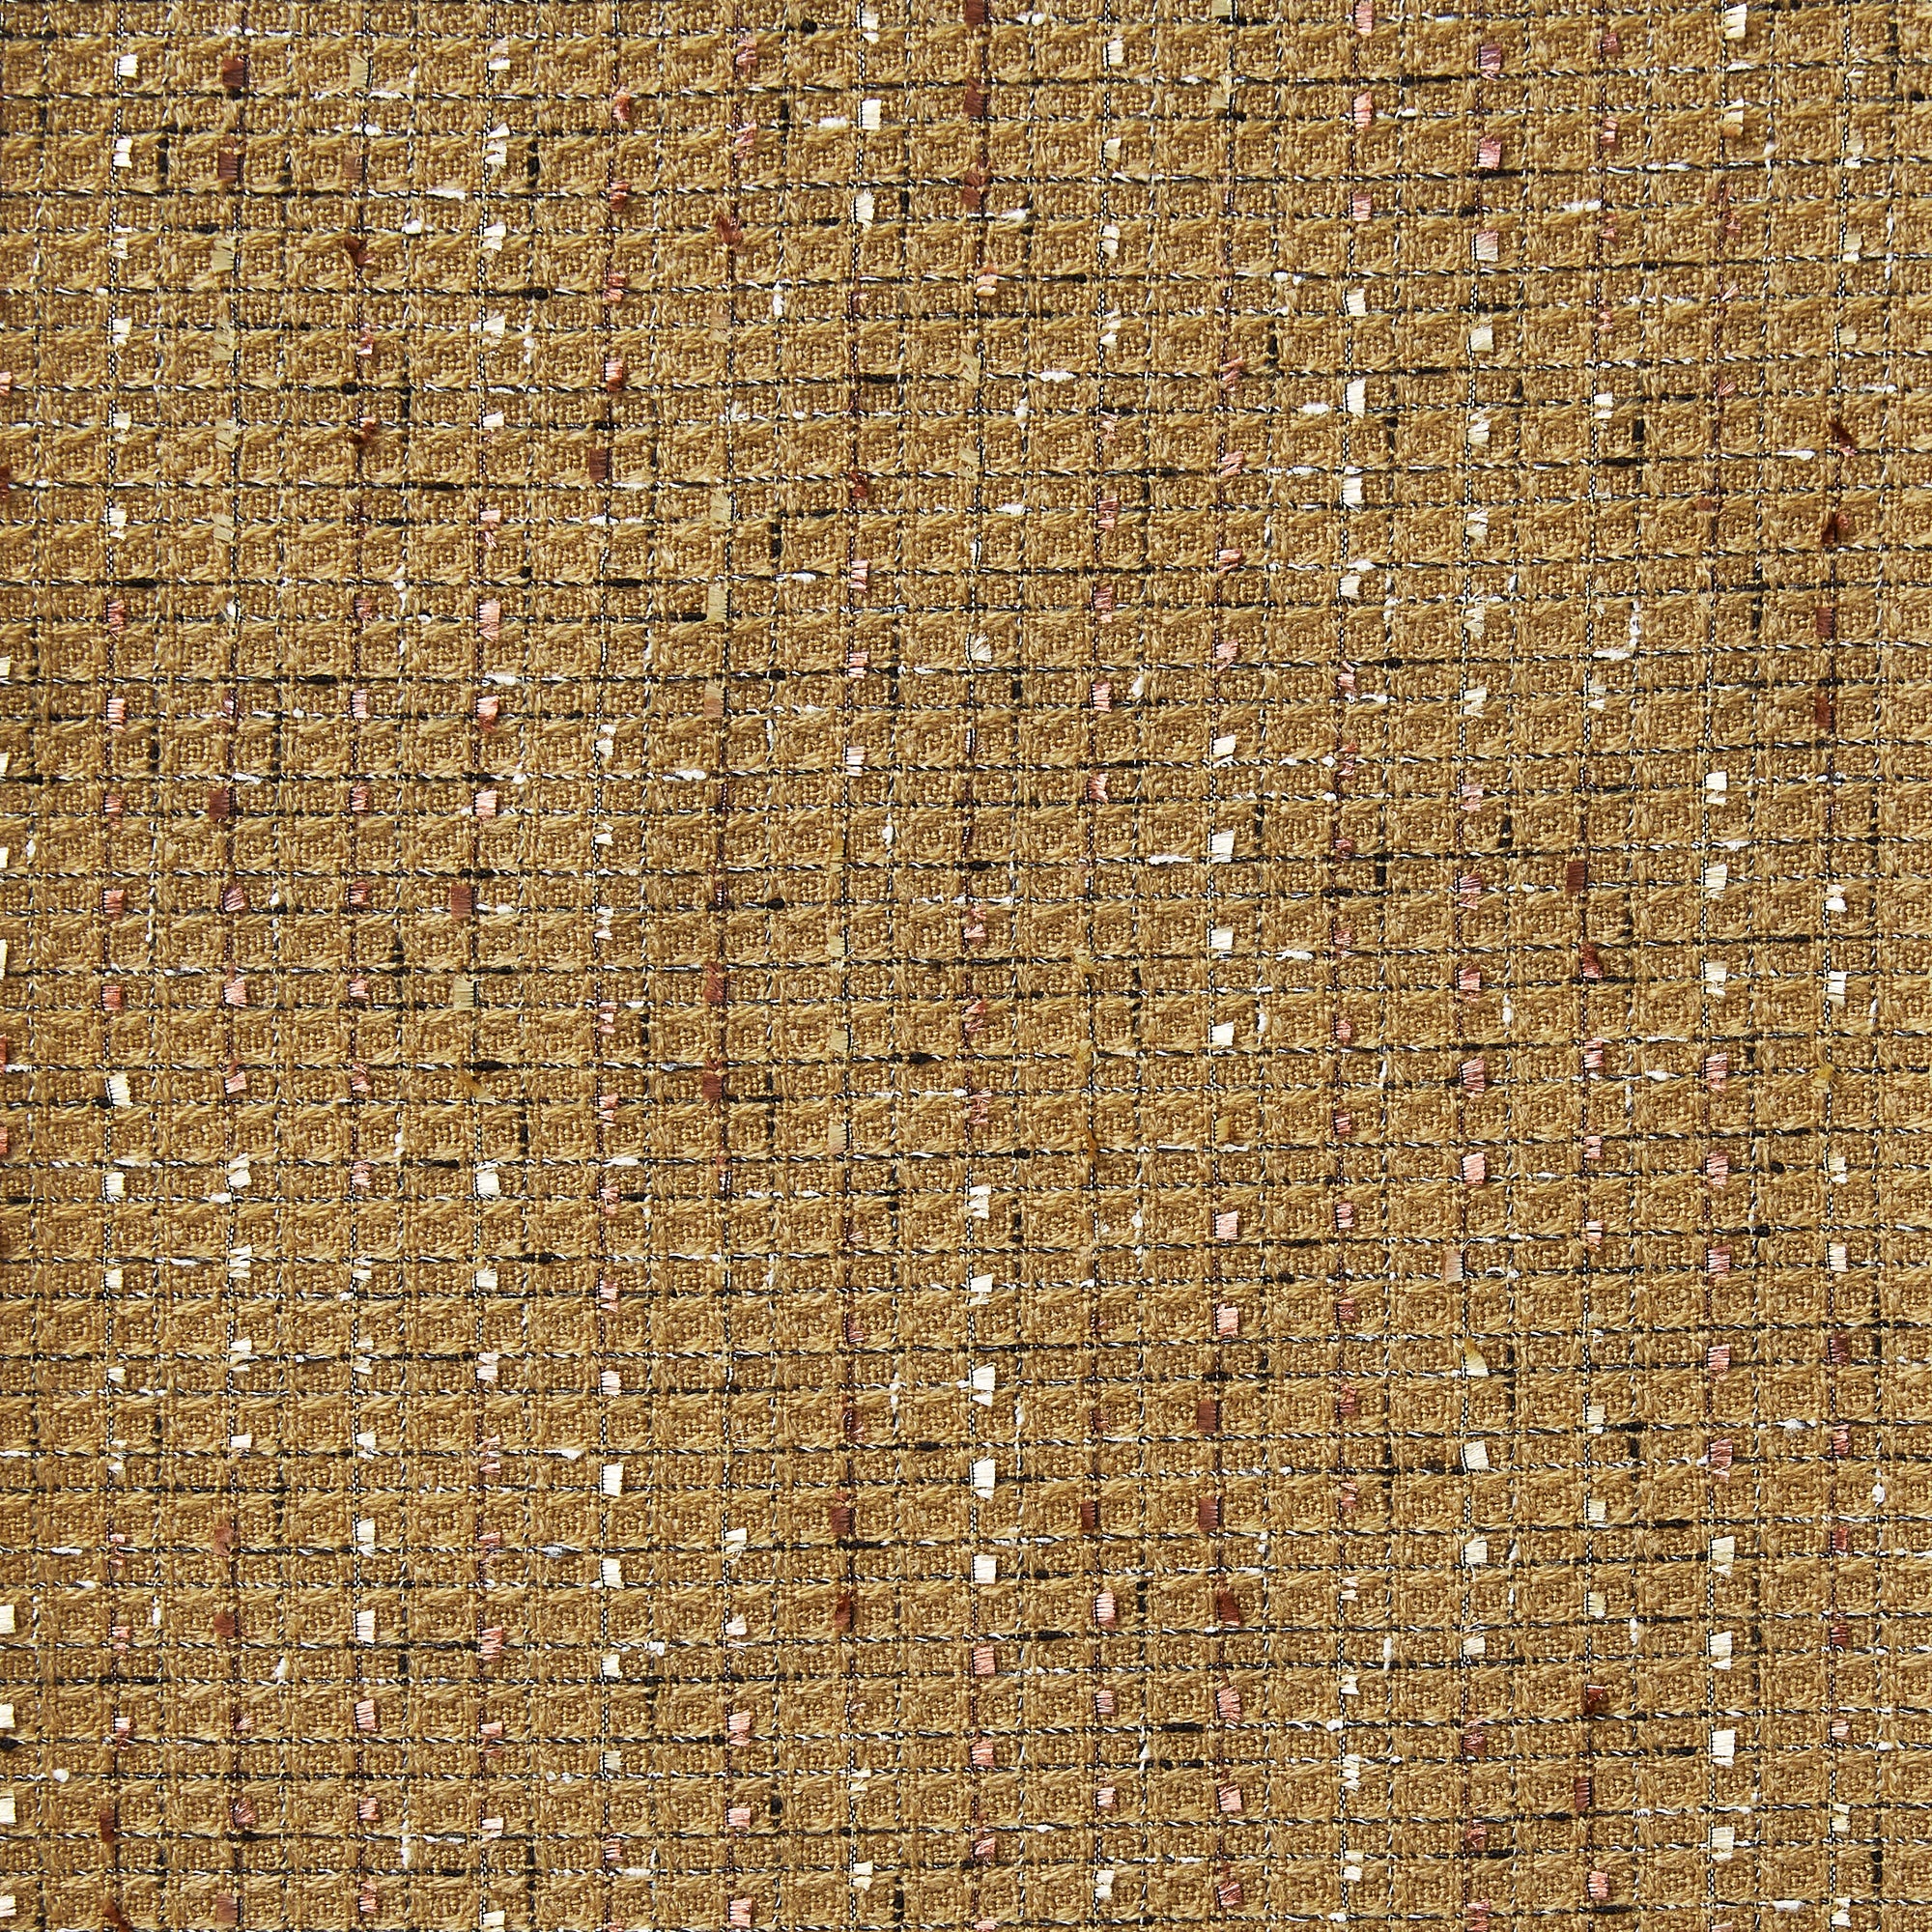 Eyelash displaying the camel  color woven yarn dyed tweed-like Acrylic  blend for suiting